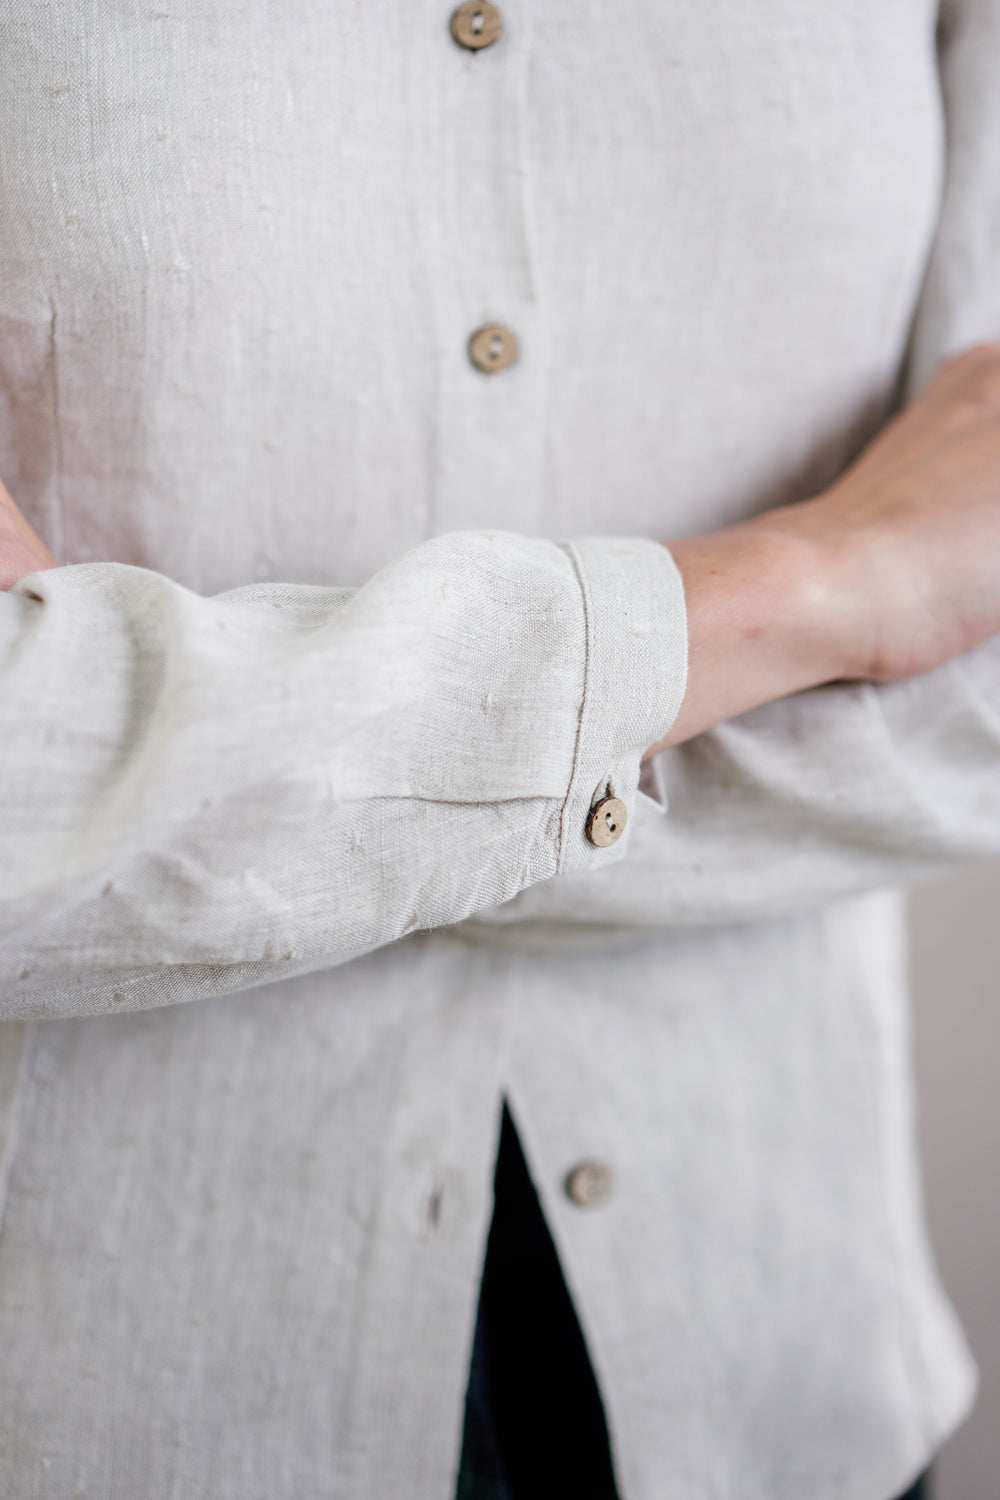 How to Get Wrinkles Out of Linen Shirts and Pants? - Son de Flor